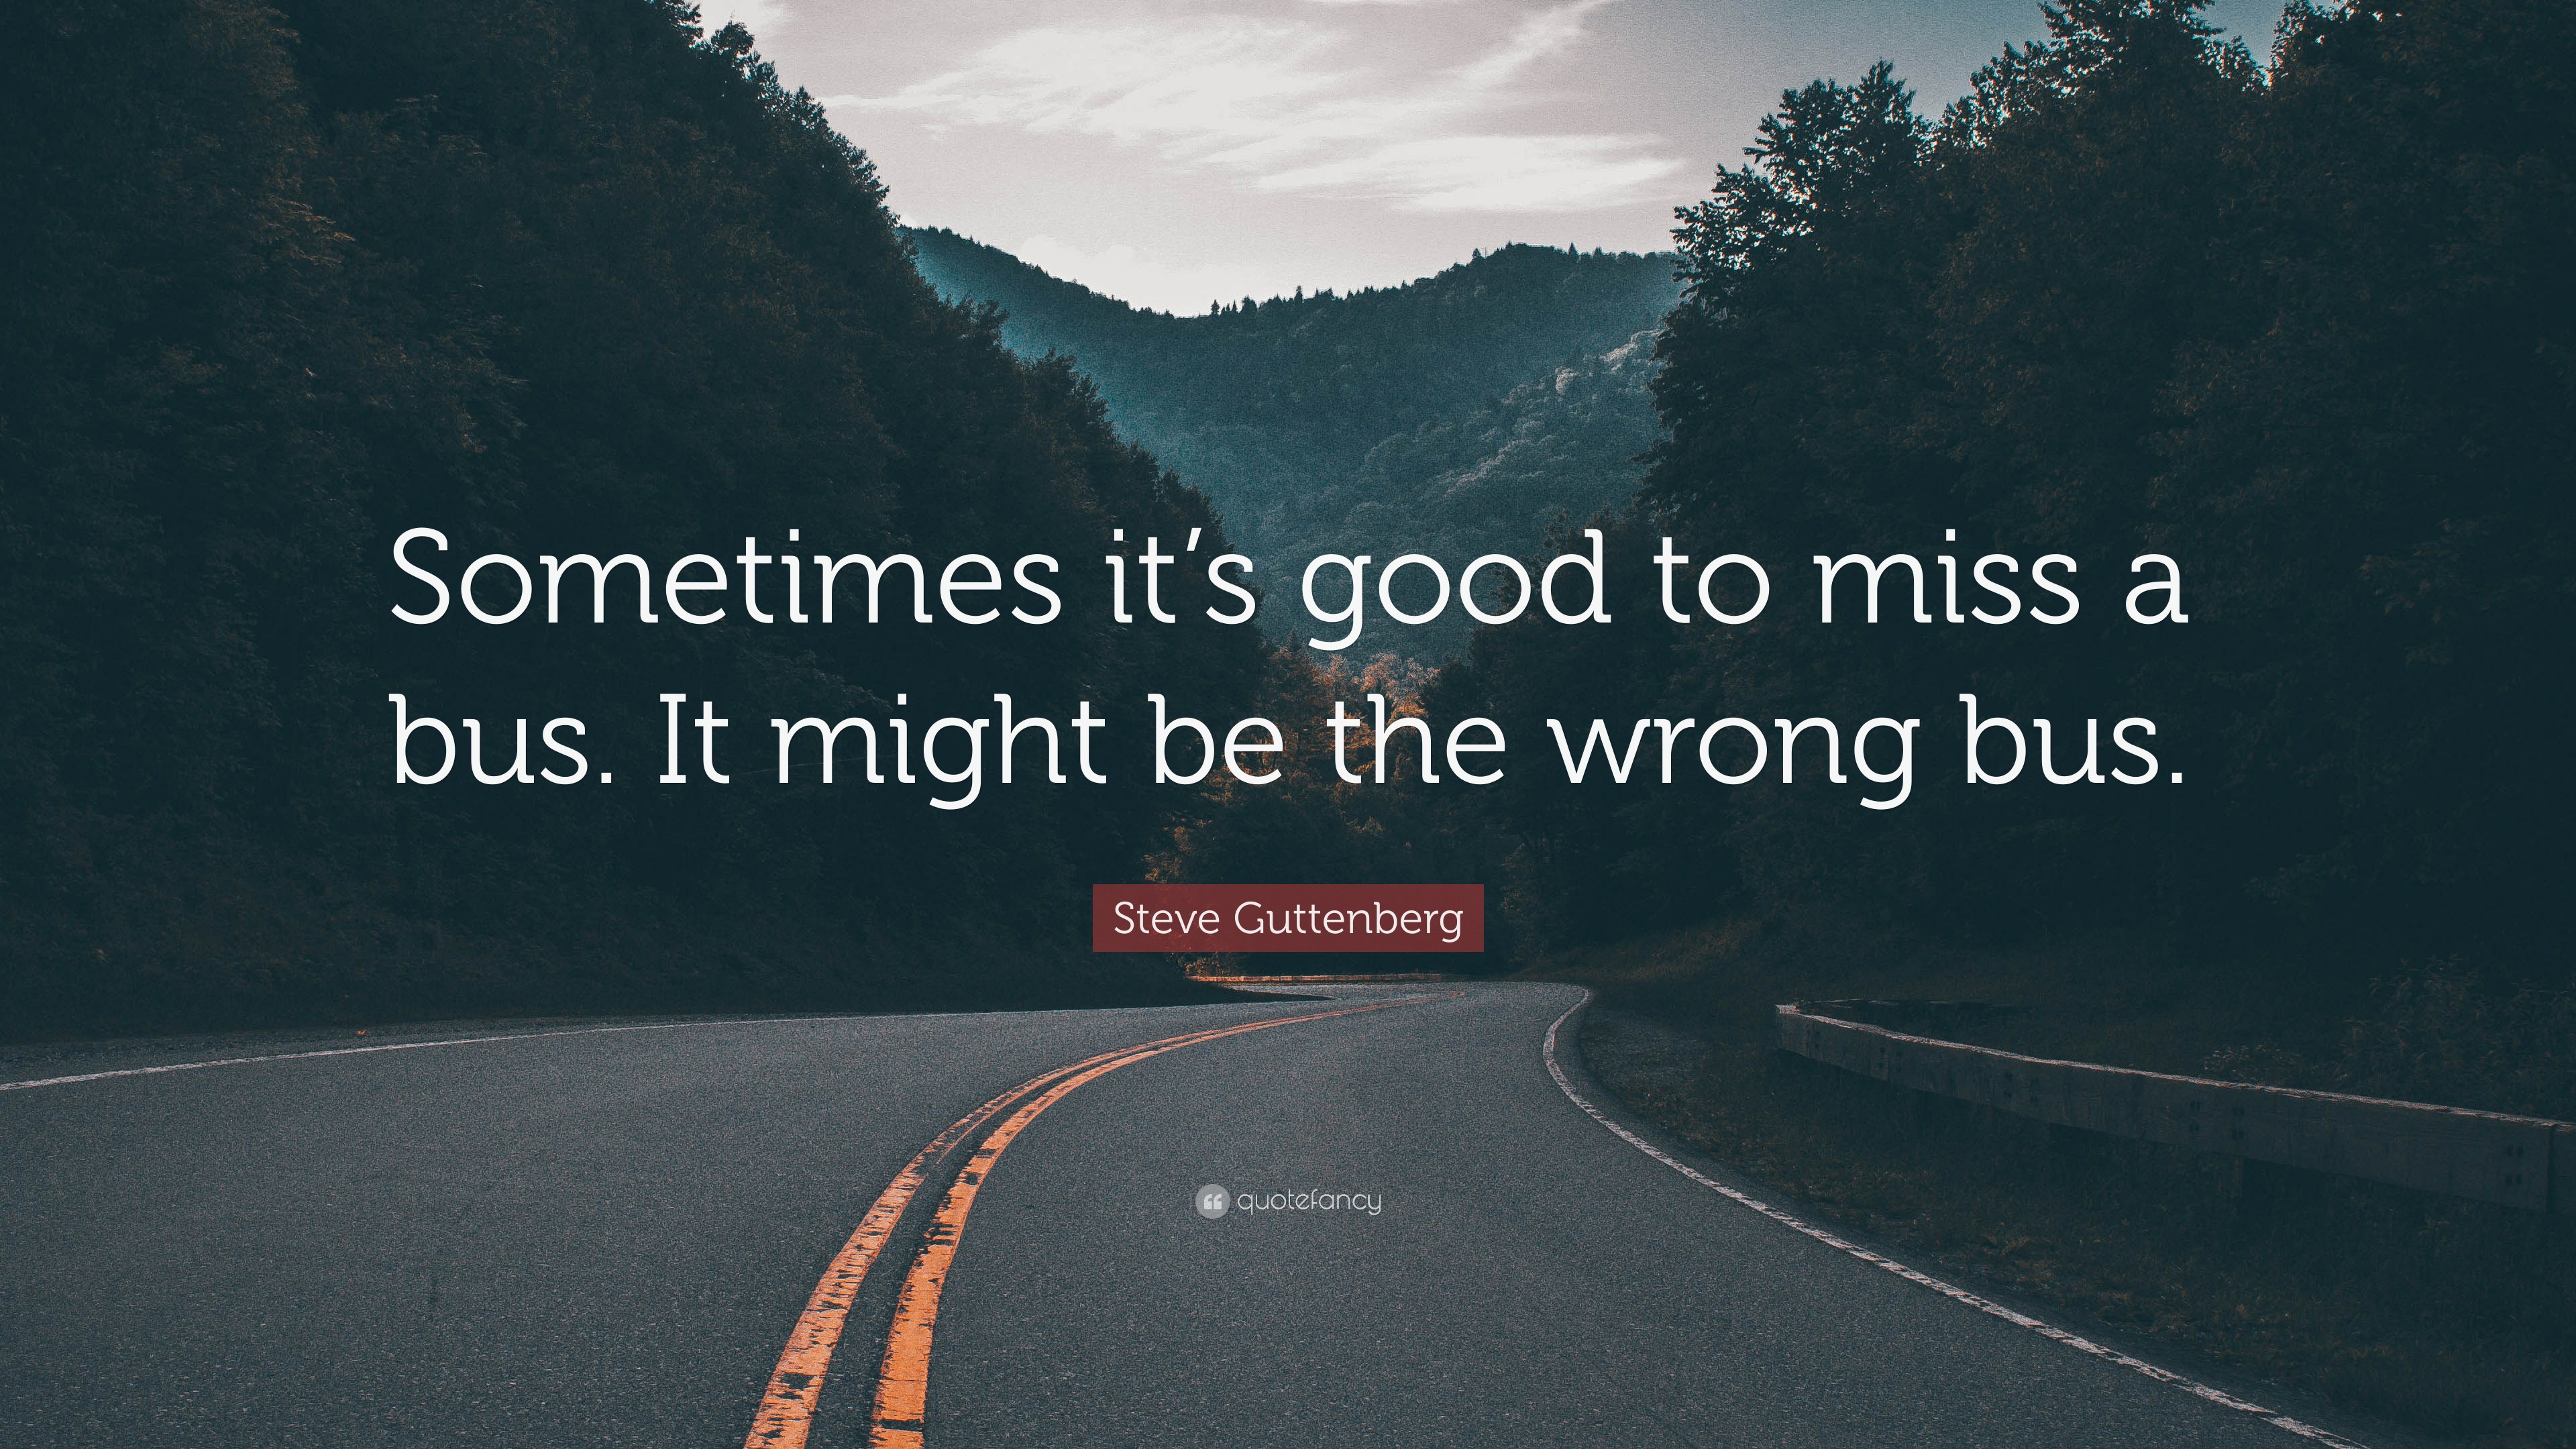 Steve Guttenberg Quote: “Sometimes it’s good to miss a bus. It might be ...